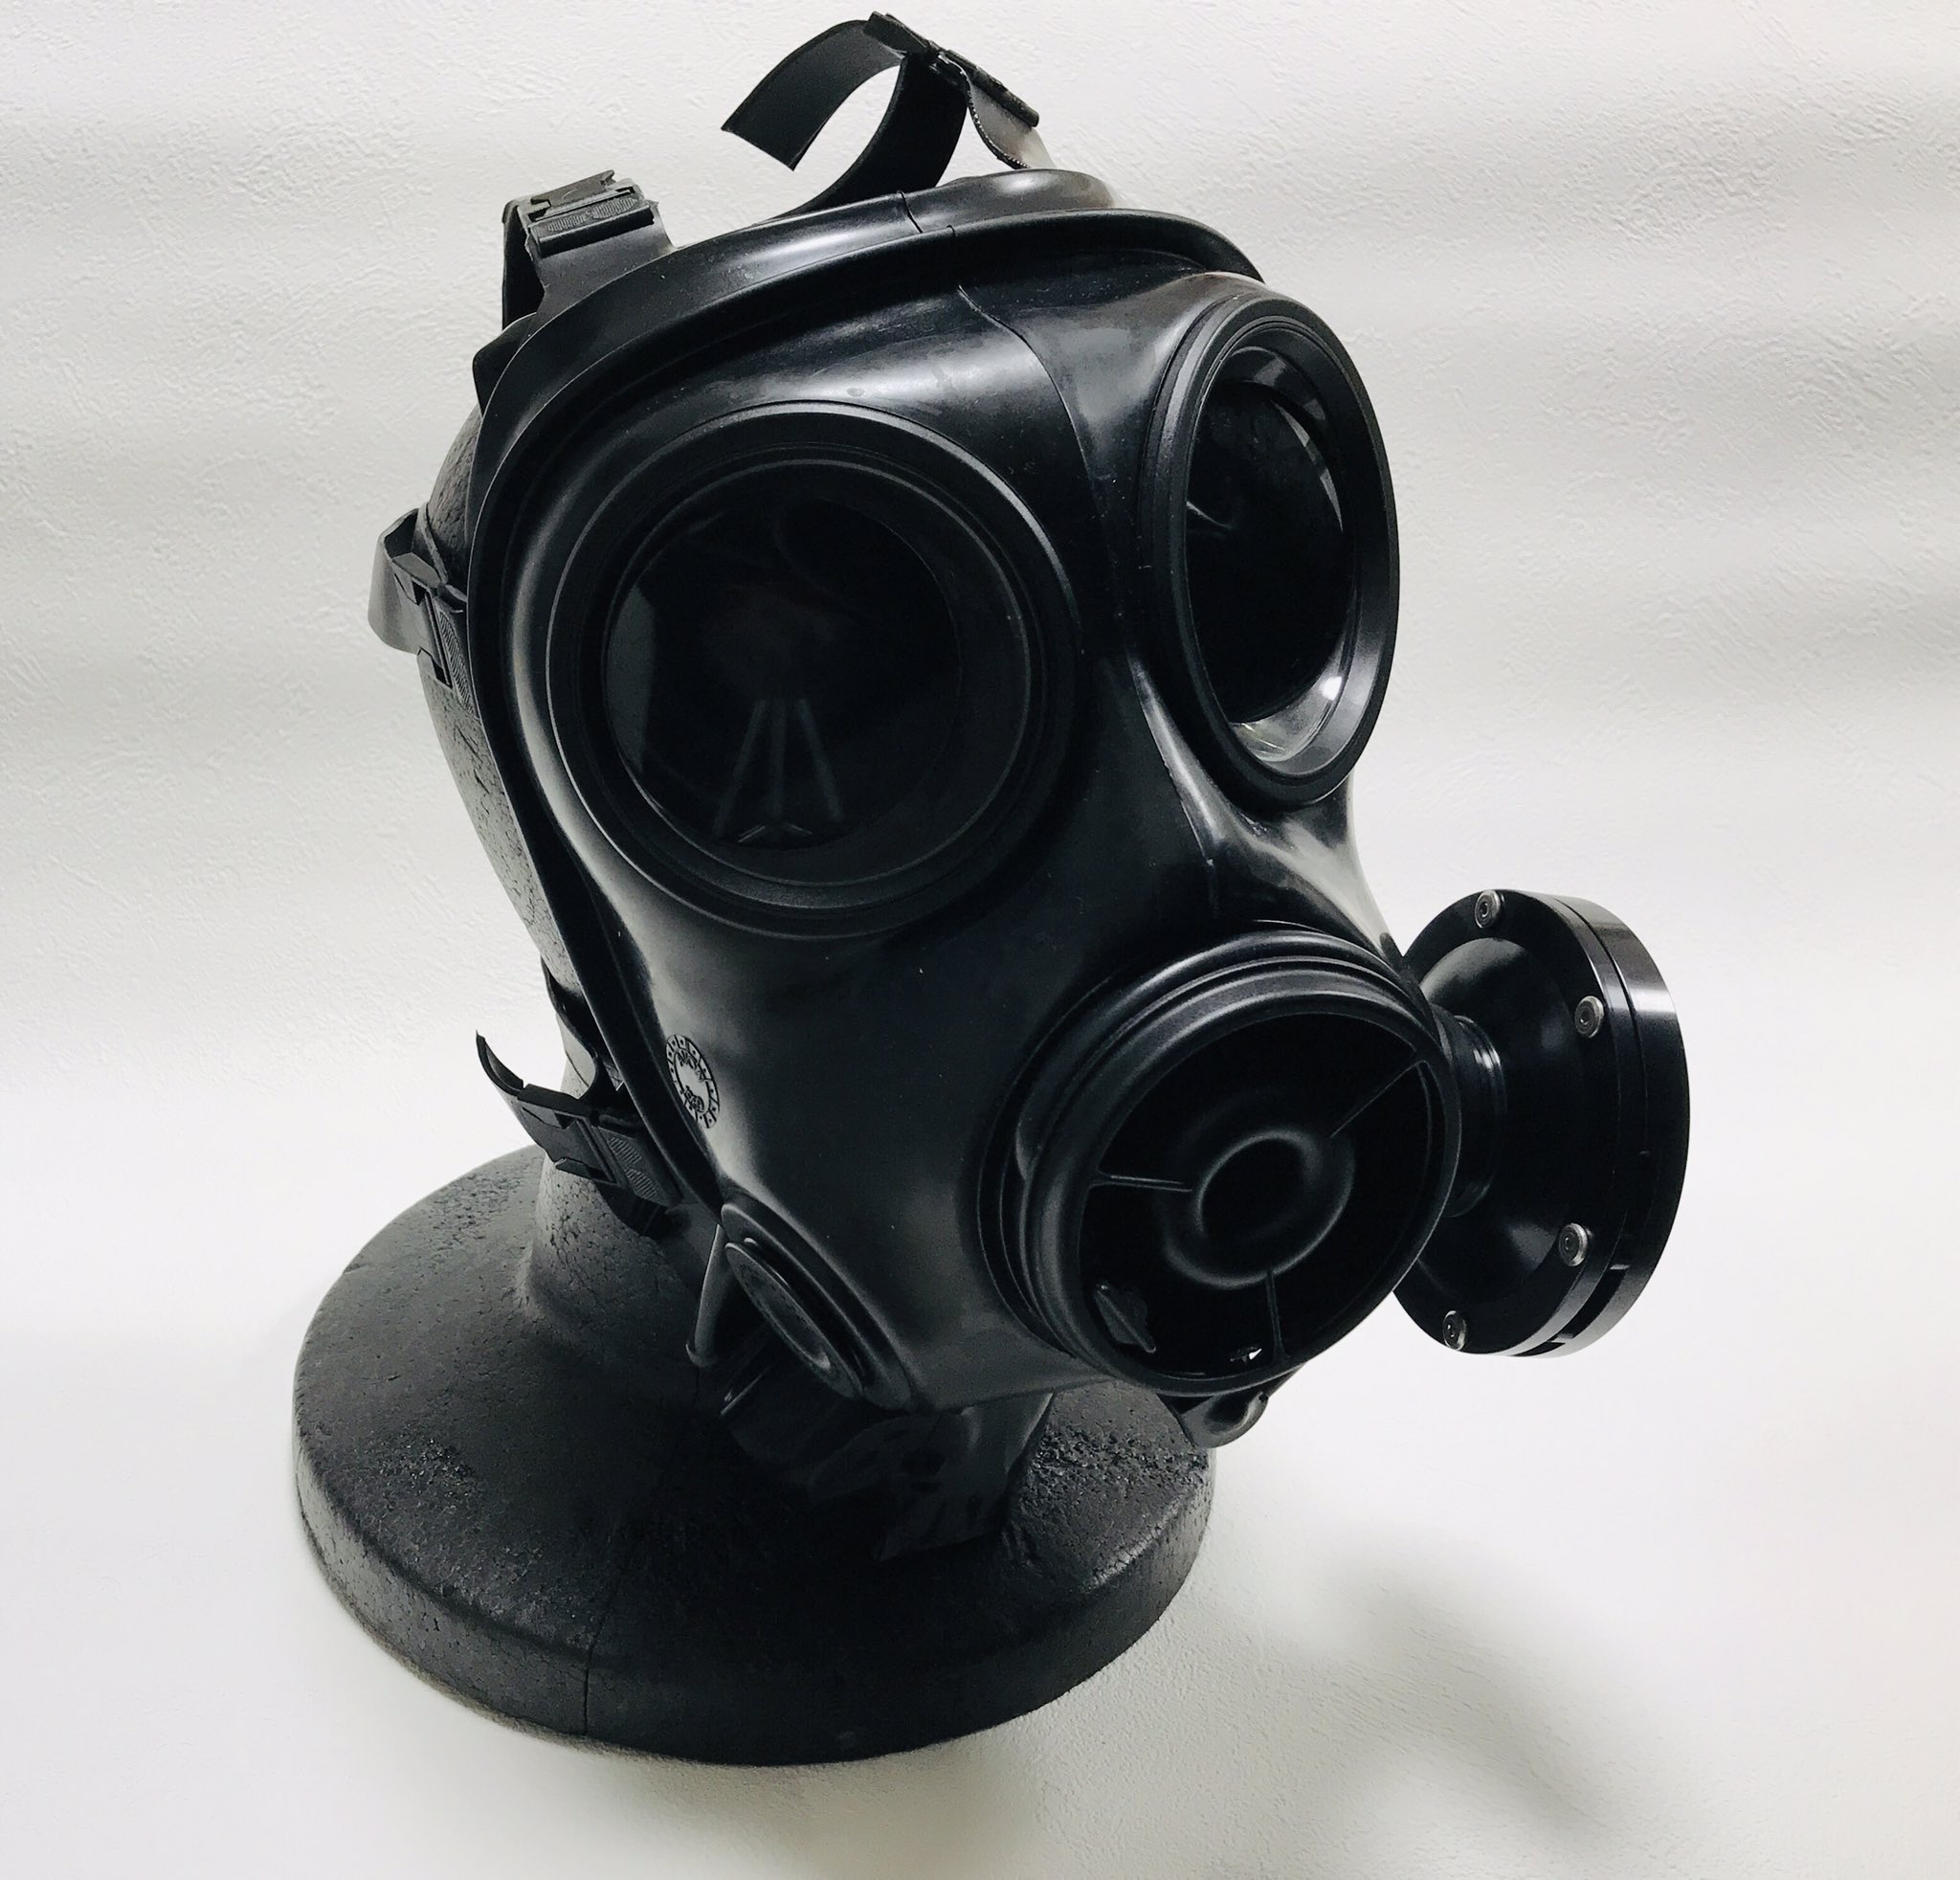 GP5 Factory auf Twitter: "A Japanese gas mask canister made of duralumin  that can be equipped with a COVID compatible R95 filter. #gasmask #COVID19  #canister #fujiyamasoubi https://t.co/0yUY8XvoWu" / Twitter